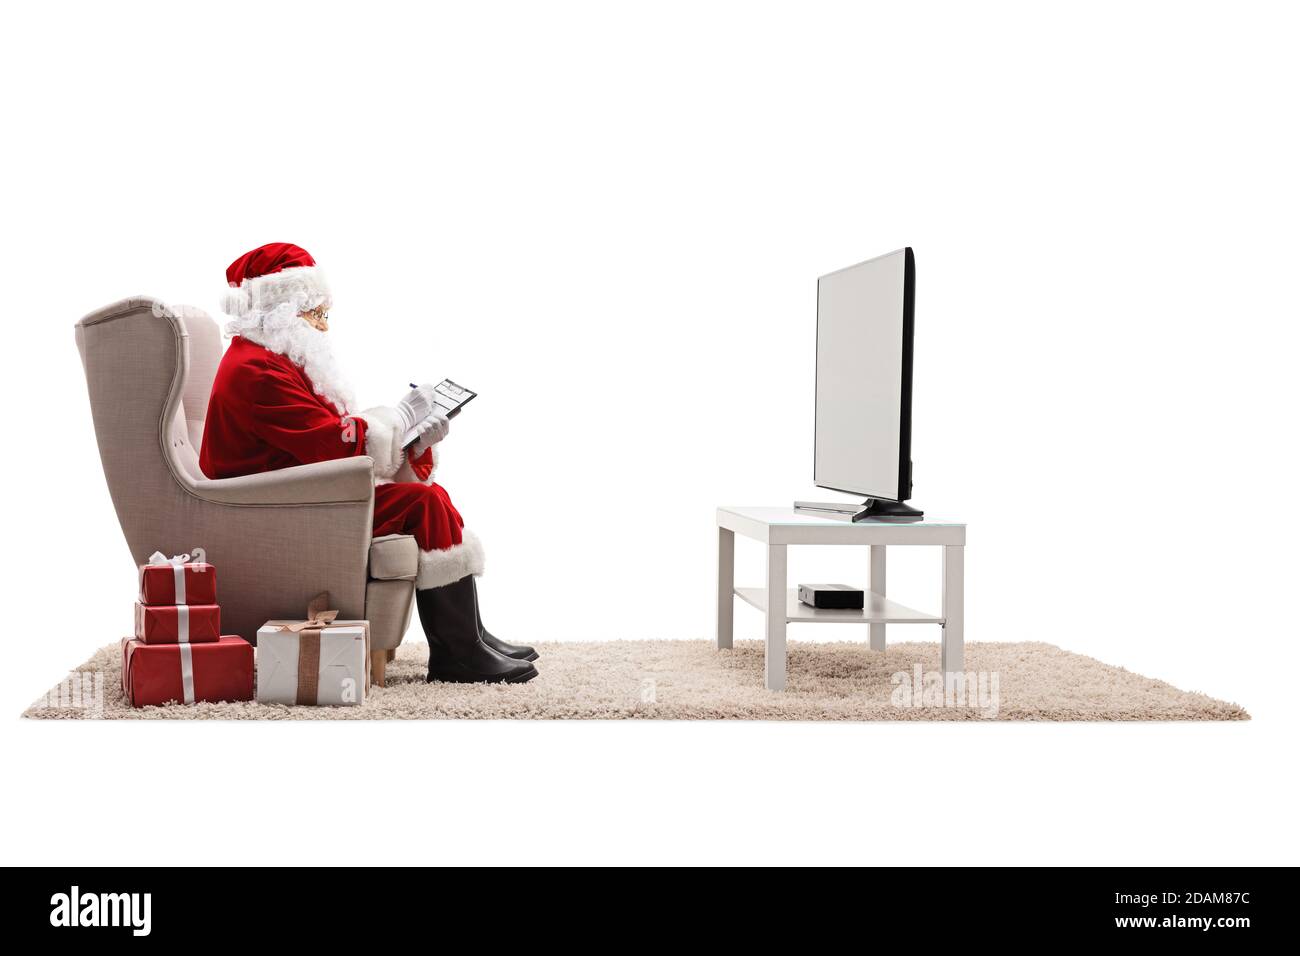 Santa claus sitting in an armchair and writing on a clipboard with presents on the floor isolated on white background Stock Photo